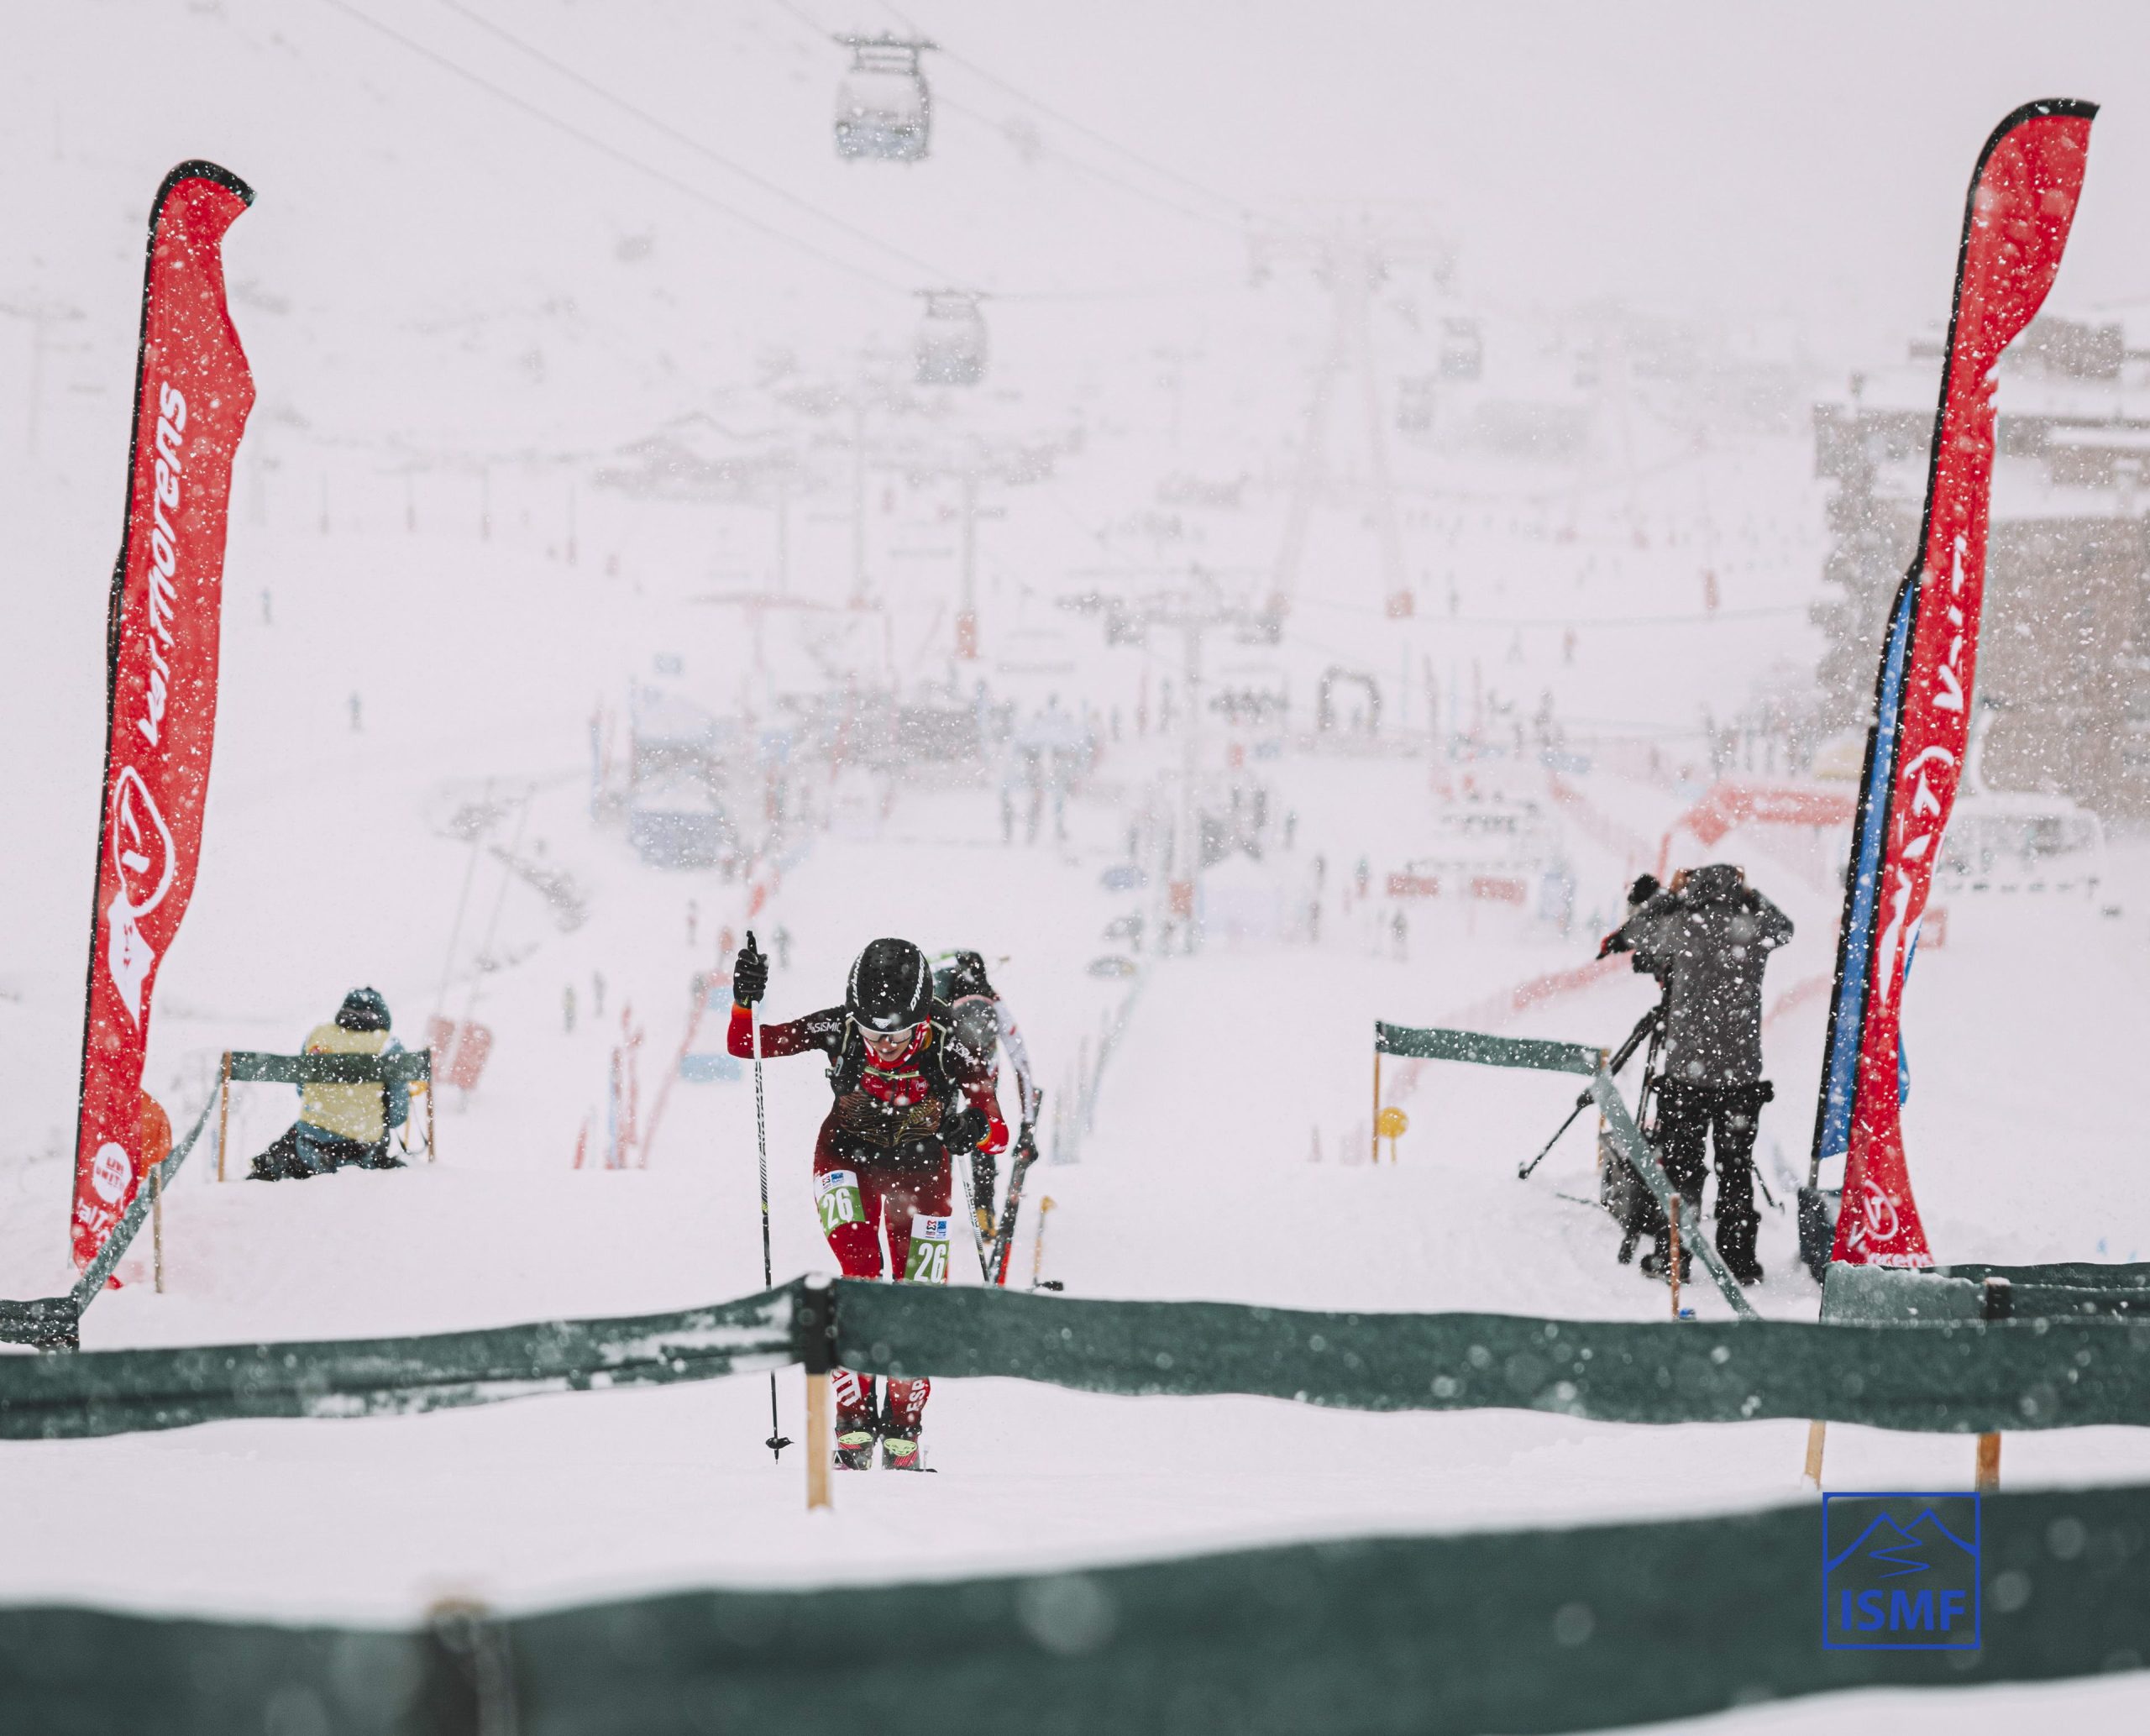 wc val thorens sprint 25112023 039 all rights ismf